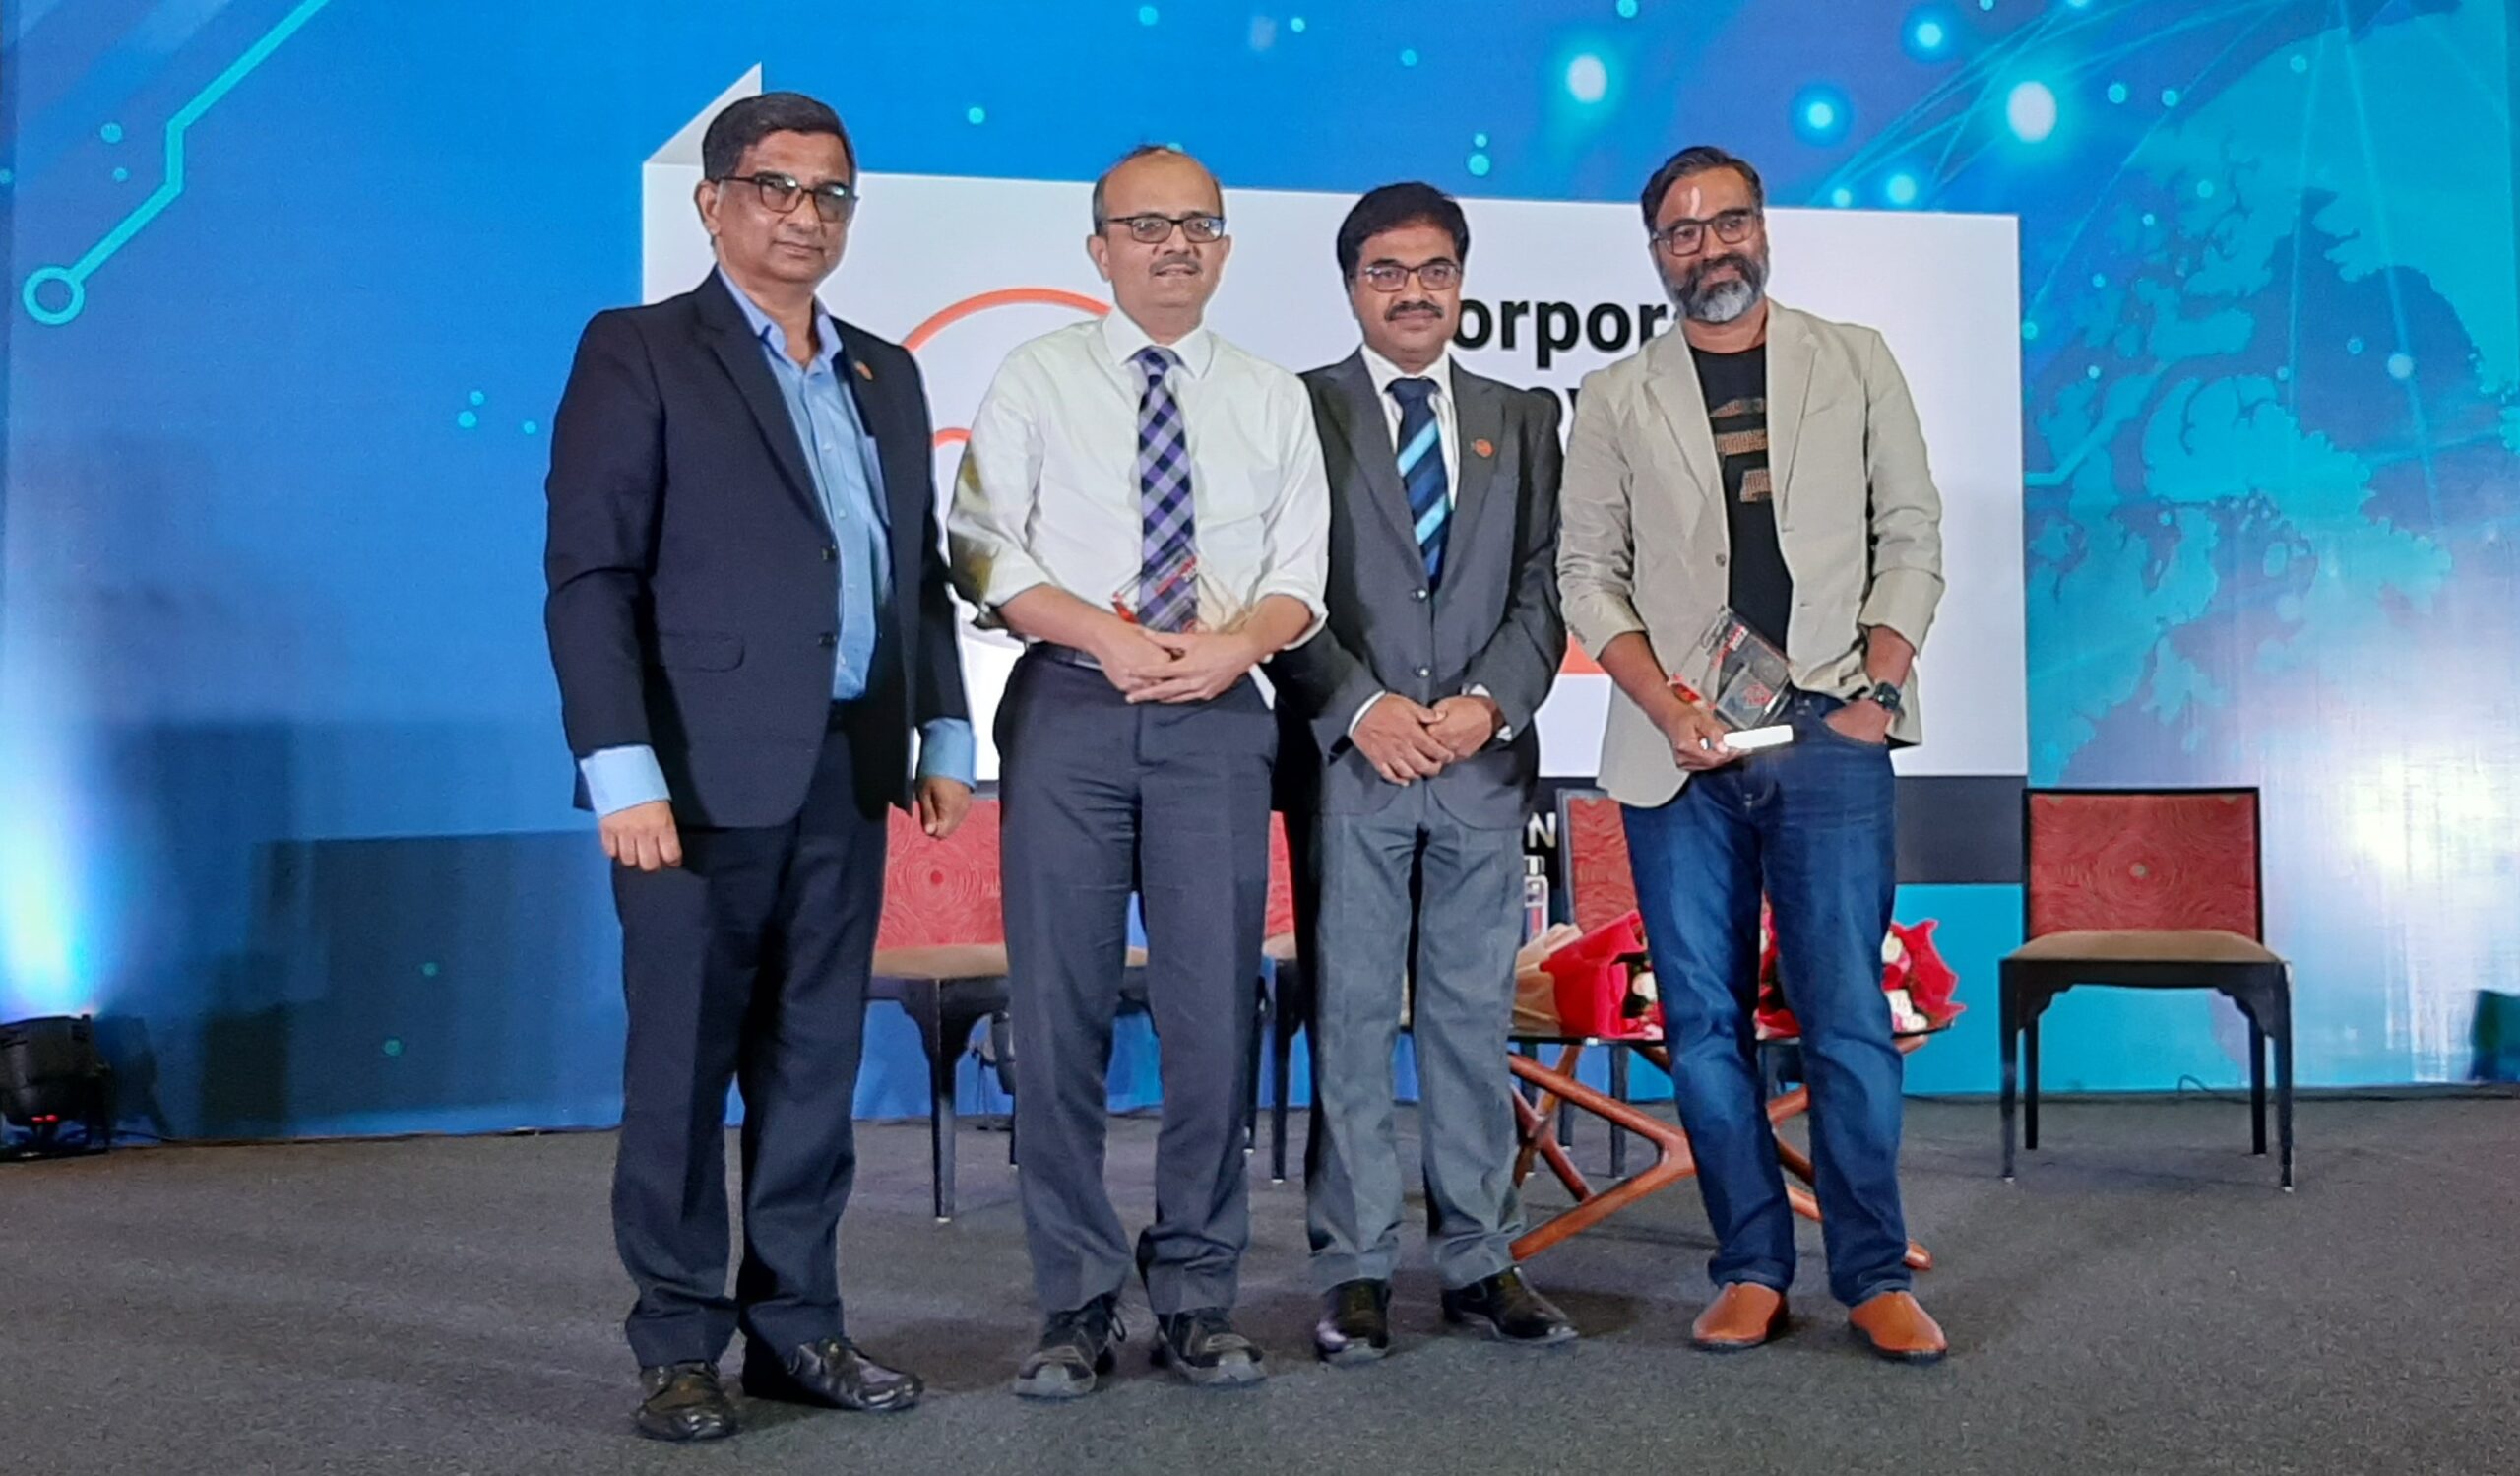 t hub’s corporate innovation conclave sparks collaboration to promote open innovation in corporates